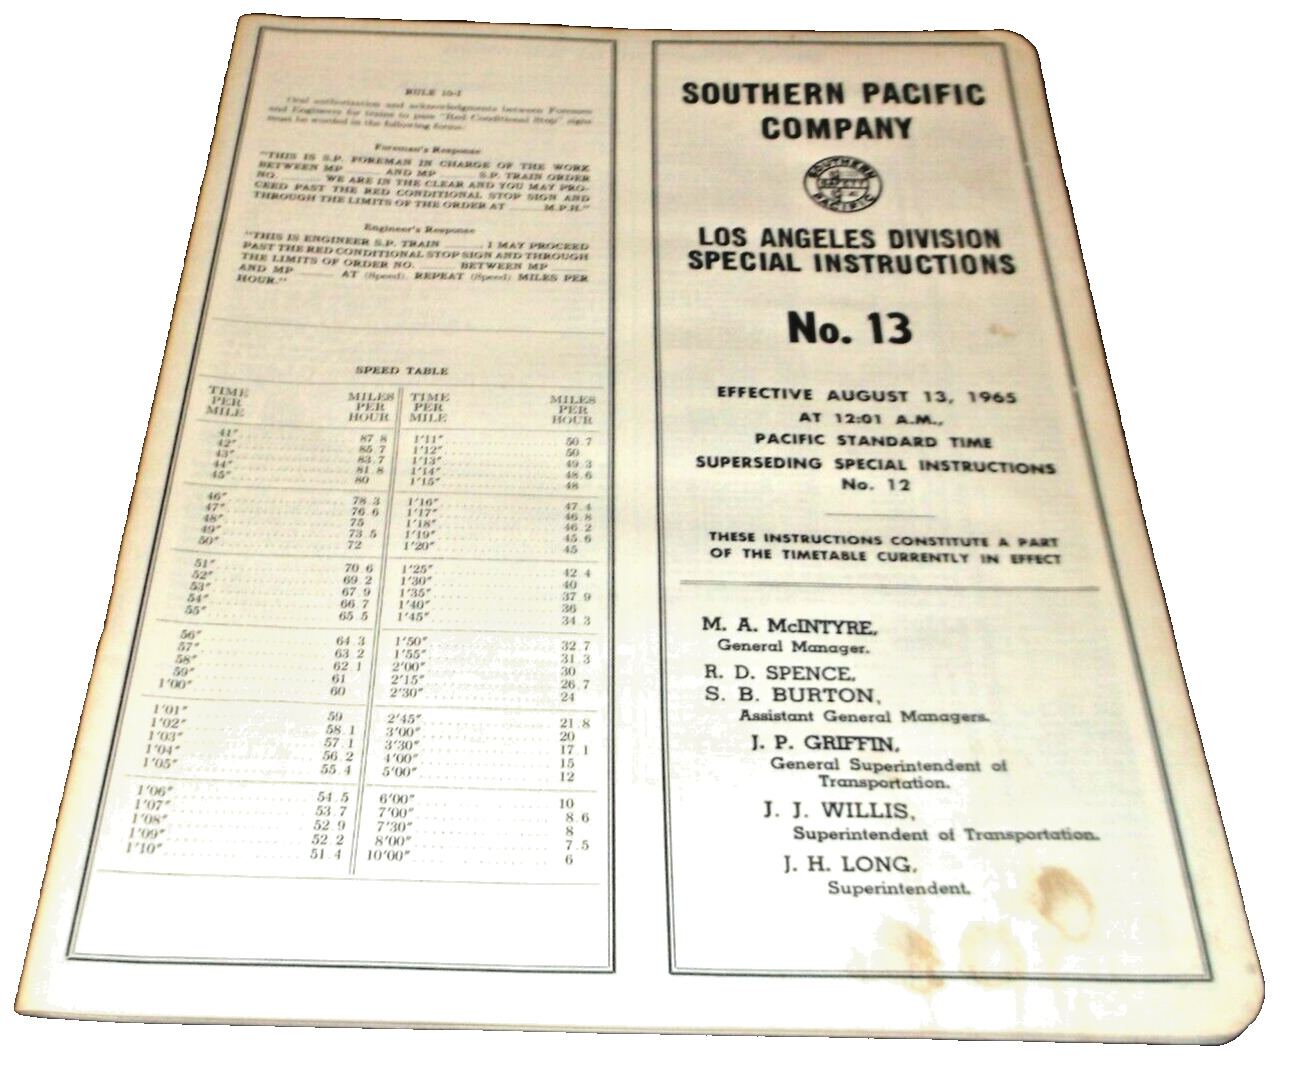 AUGUST 1965 SOUTHERN PACIFIC LOS ANGELES DIVISION SPECIAL INSTRUCTIONS #13